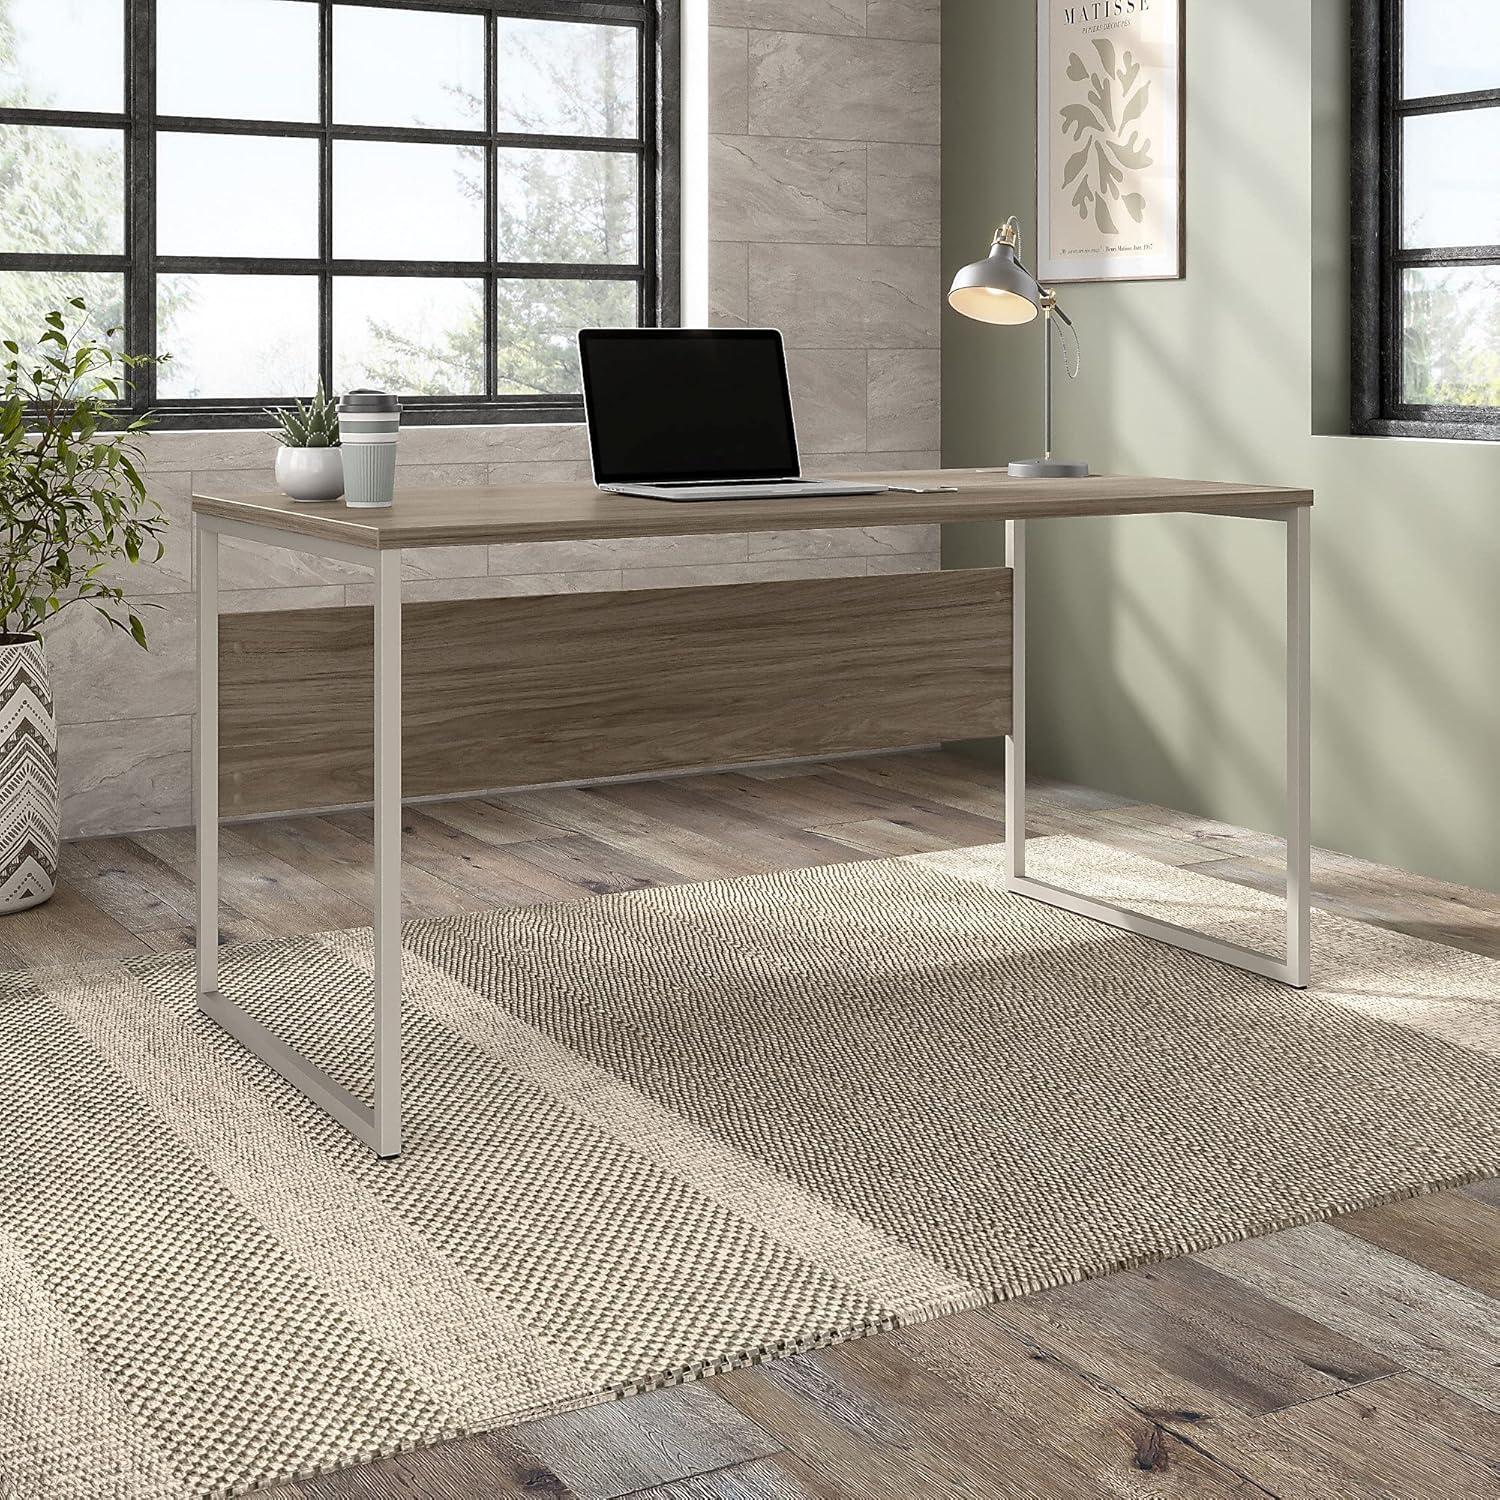 Modern Hickory 60W Home Office Desk with Silver Metal Legs